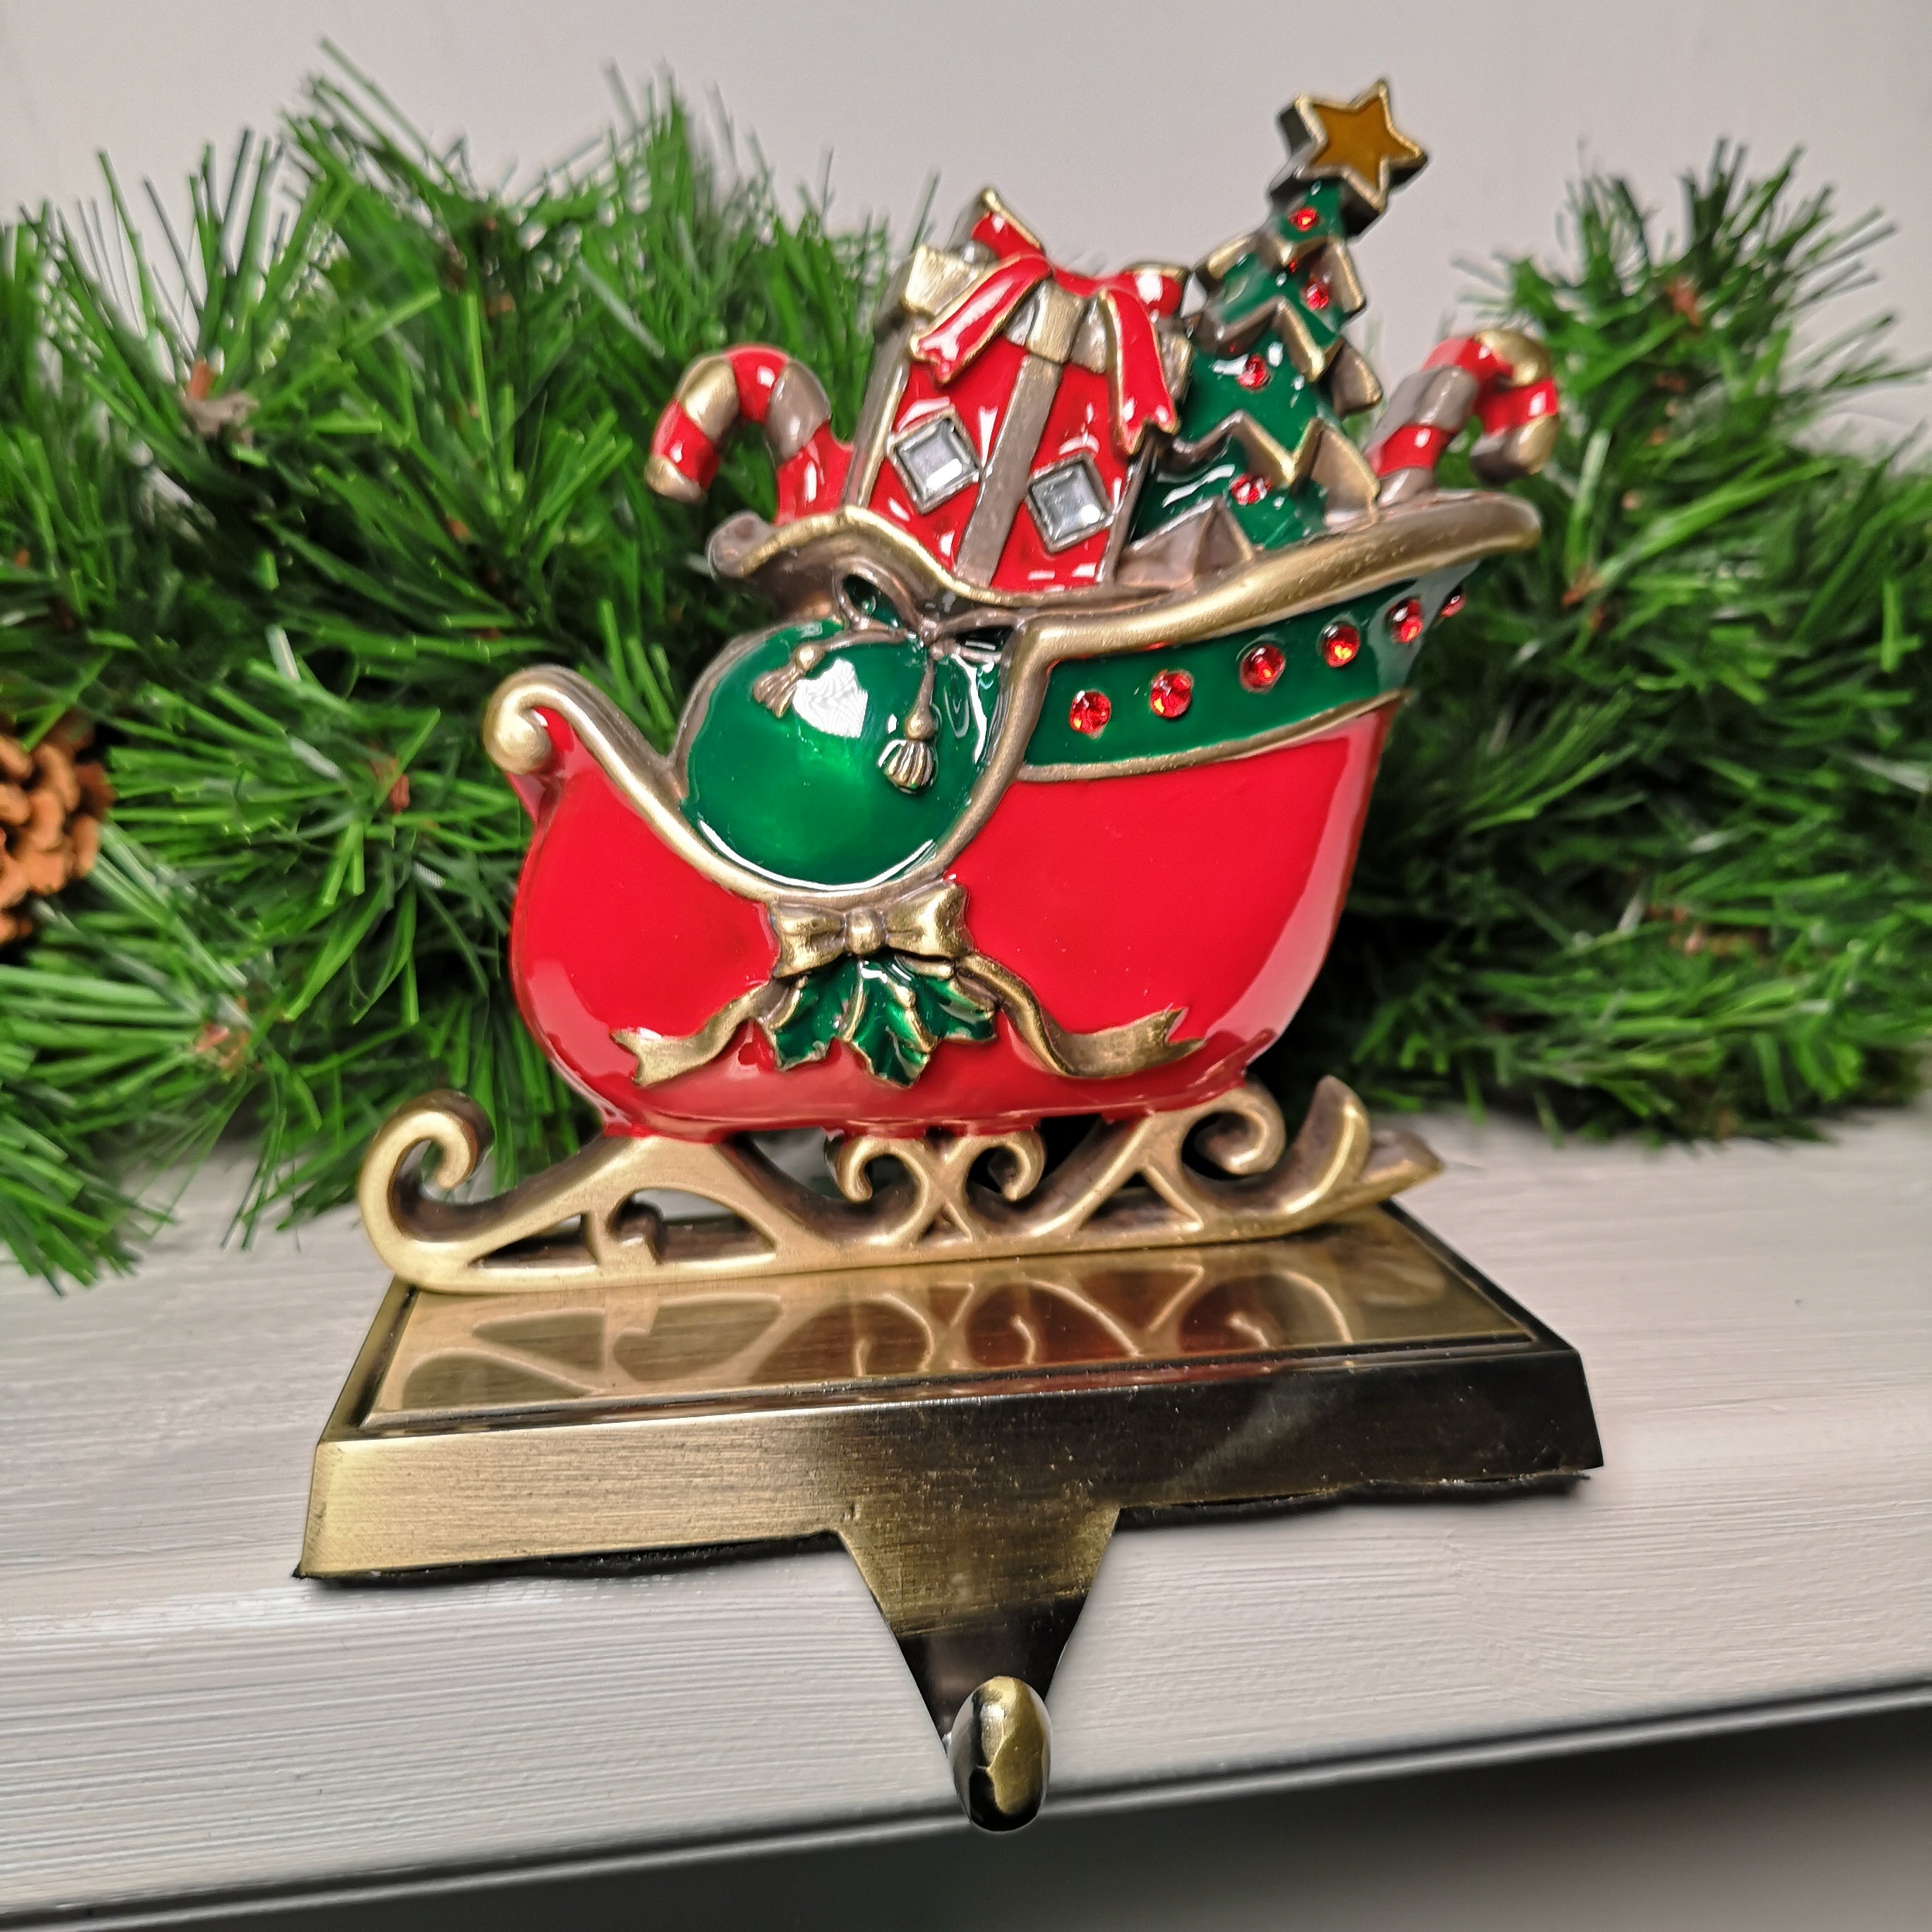 16cm Premier Present Filled Sleigh Christmas Stocking Hanger in Red and Green